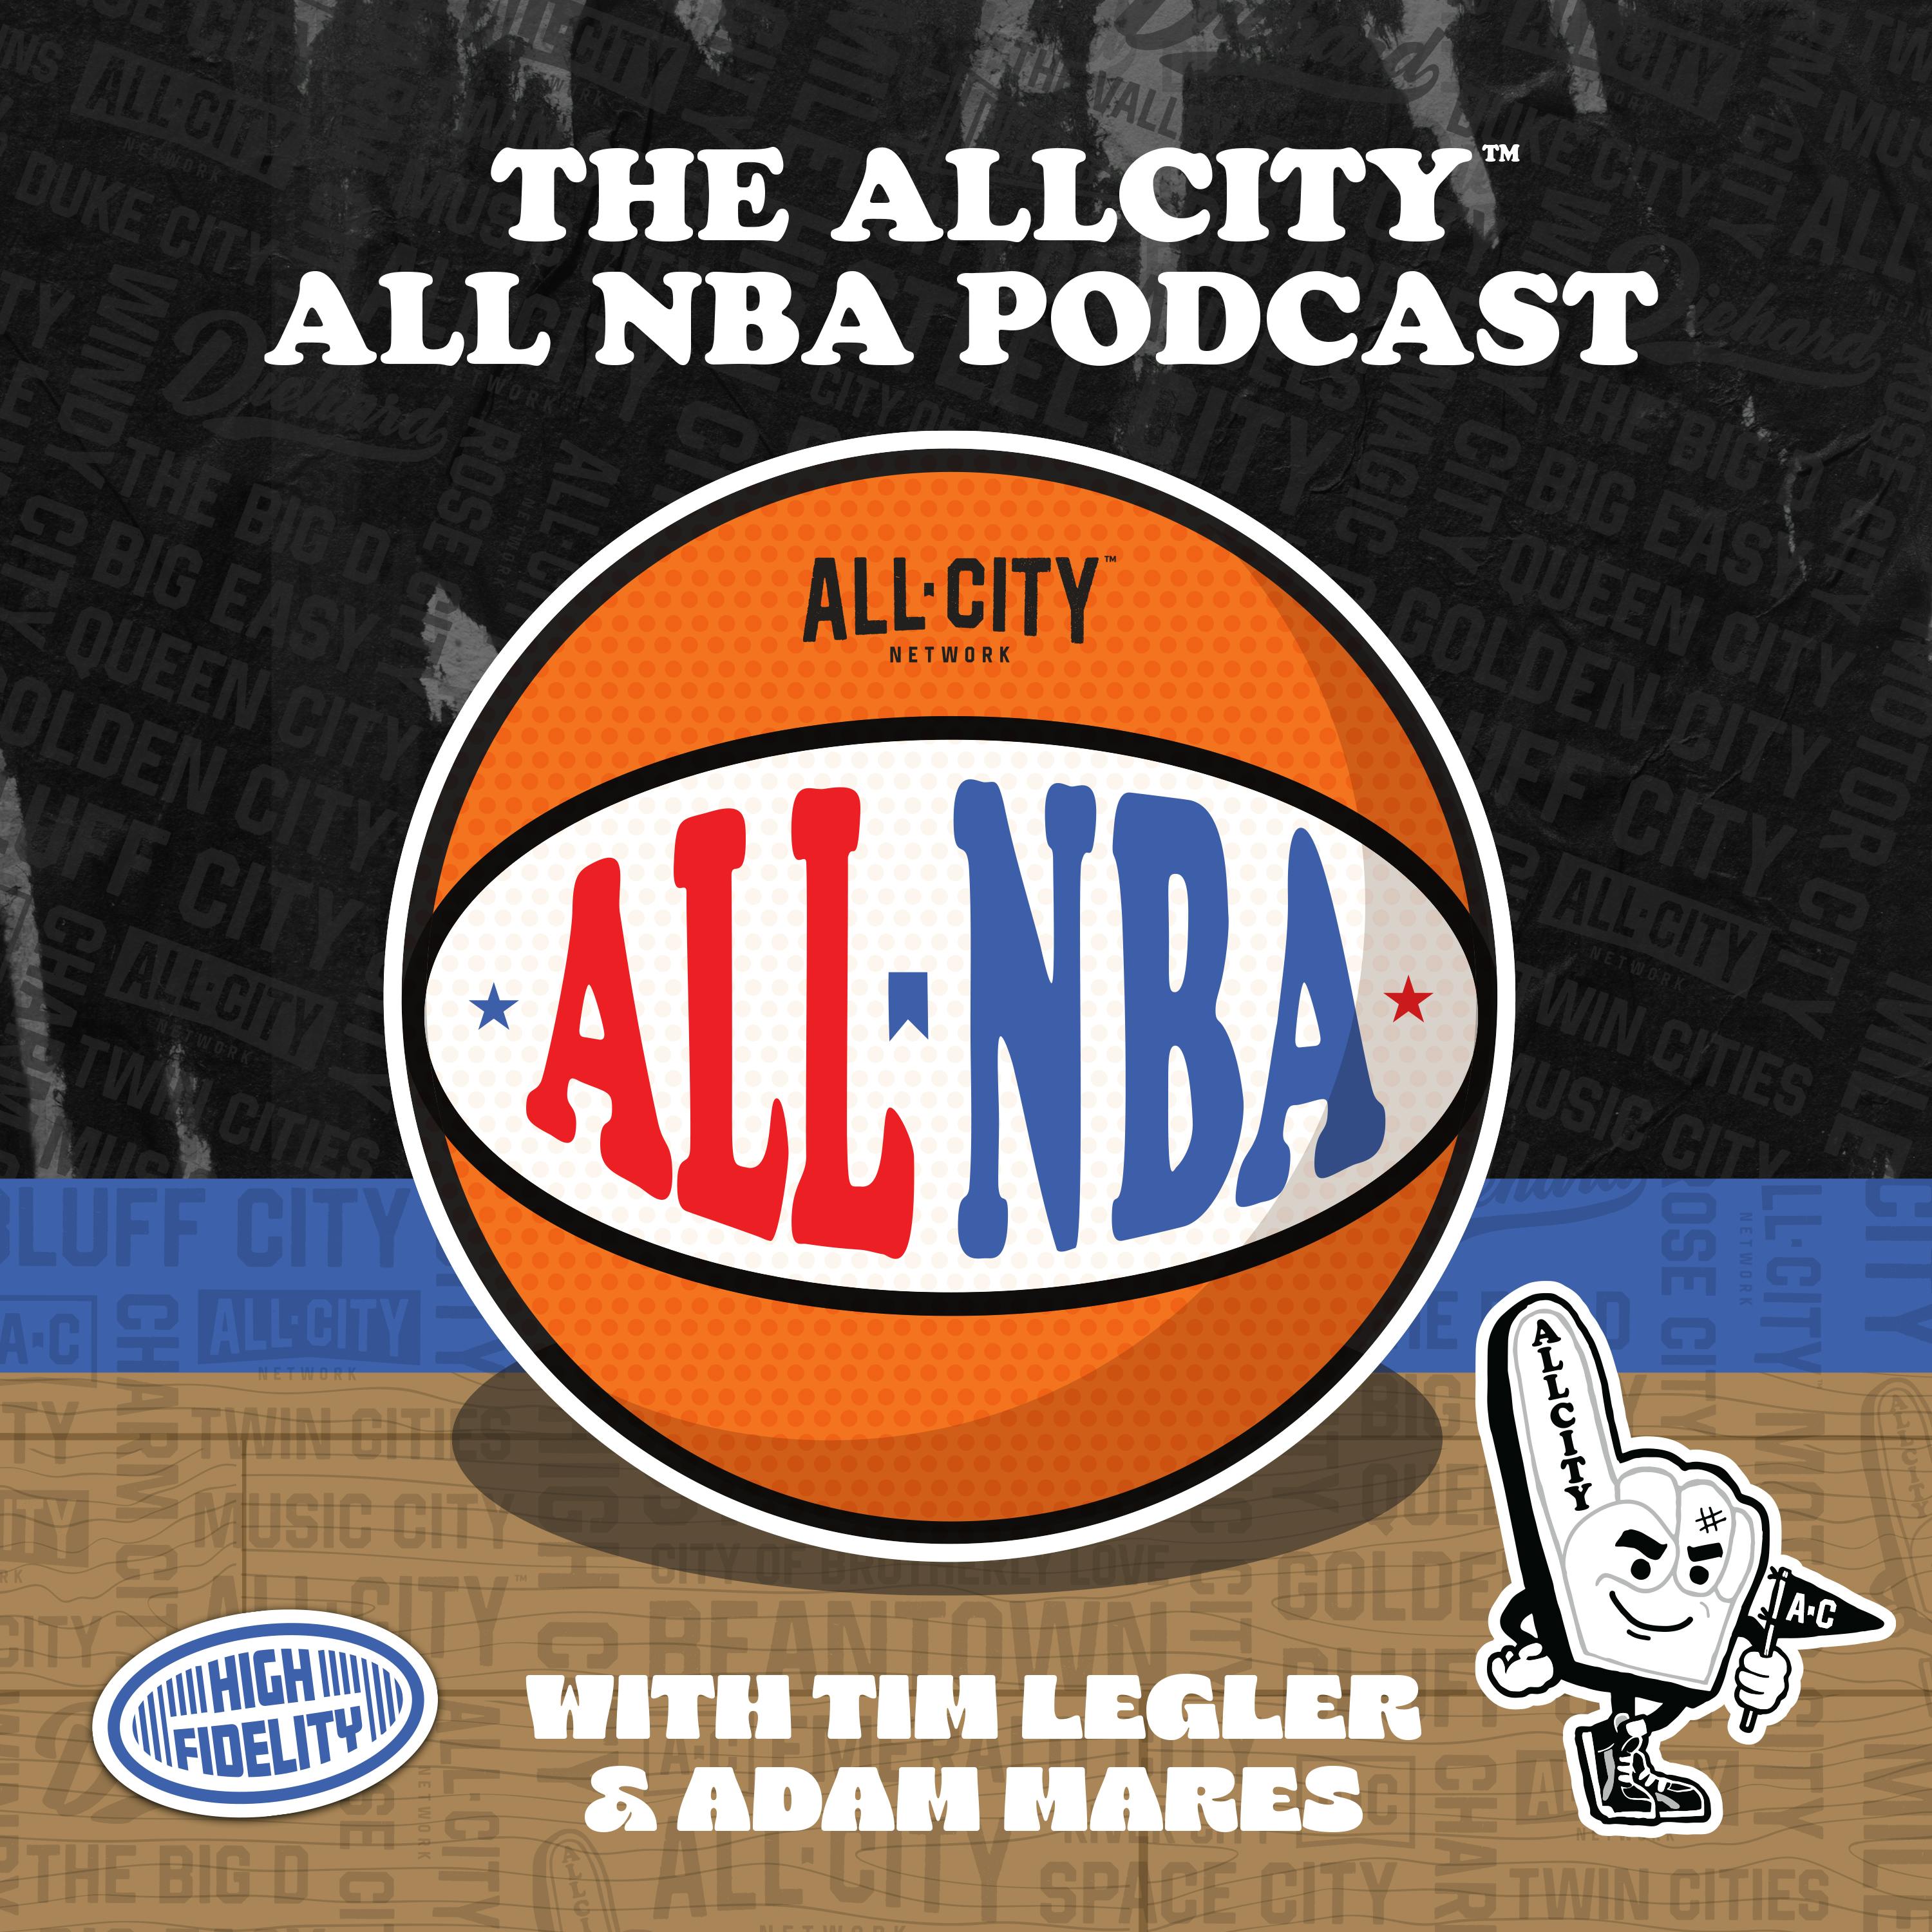 The ALL NBA Podcast: Did the Miami Heat expose a Boston Celtics weakness?